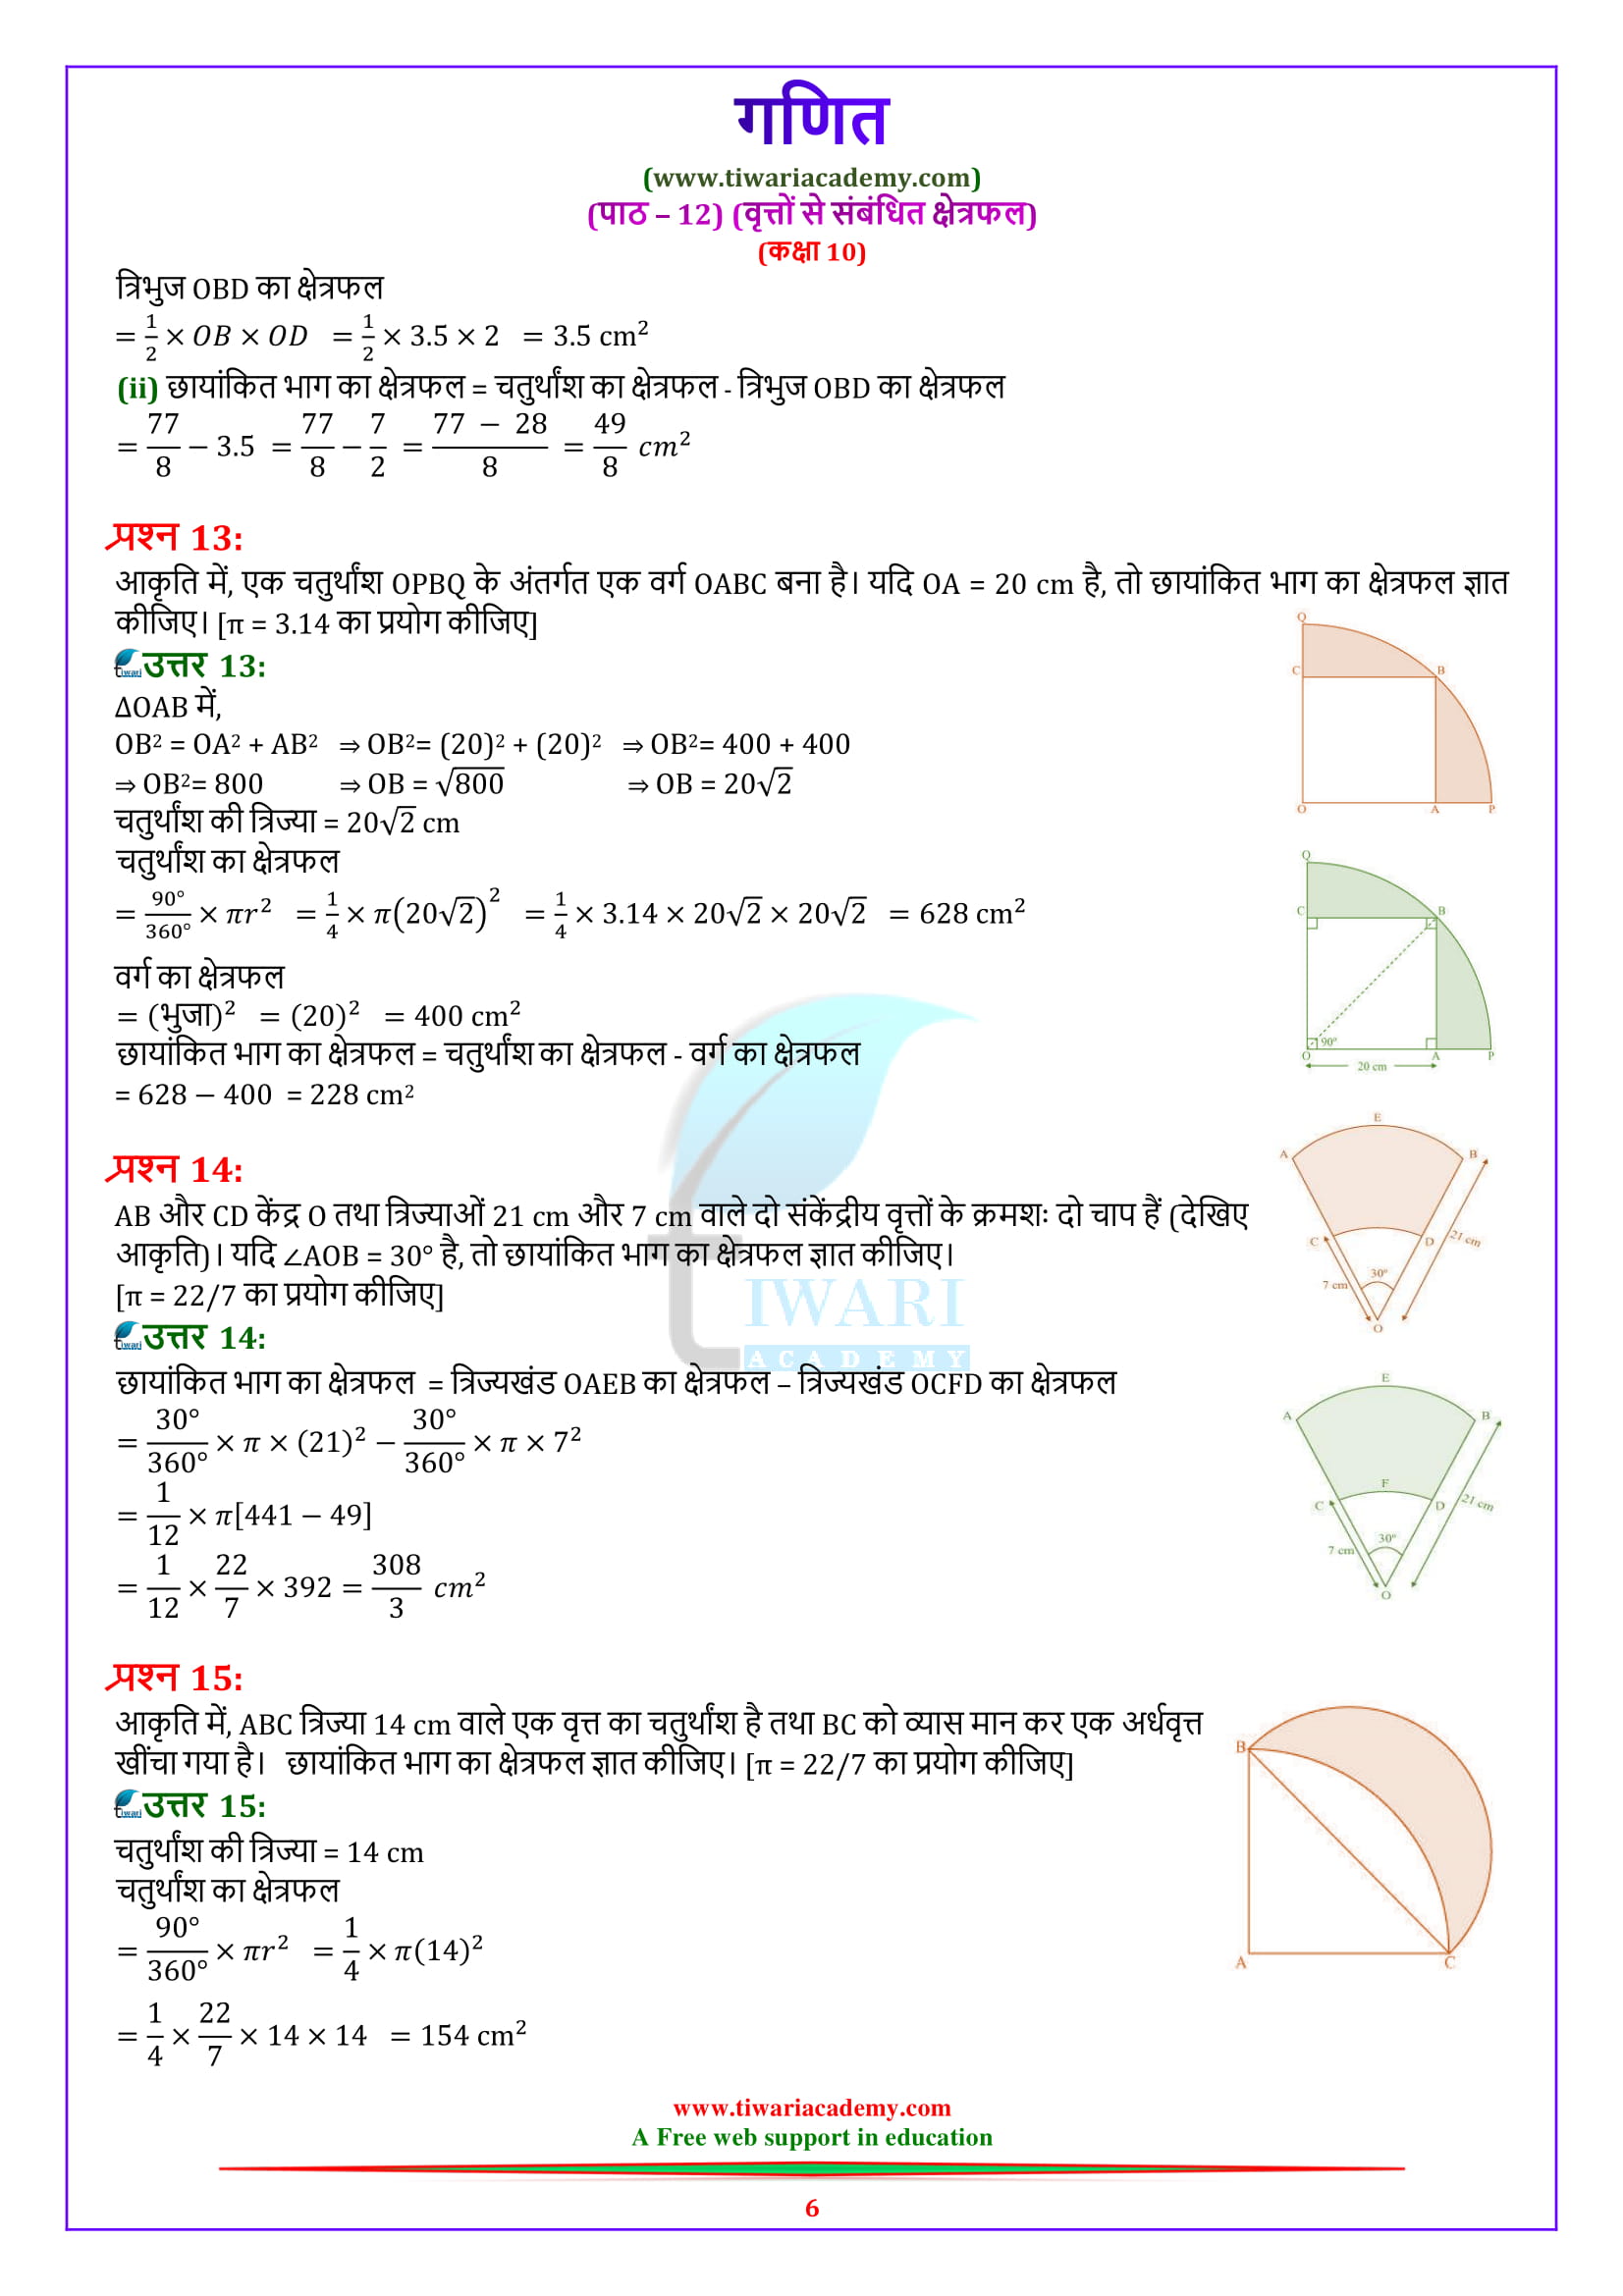 10 Maths Chapter 12 ex. 12.3 solutions full exercise in PDF.